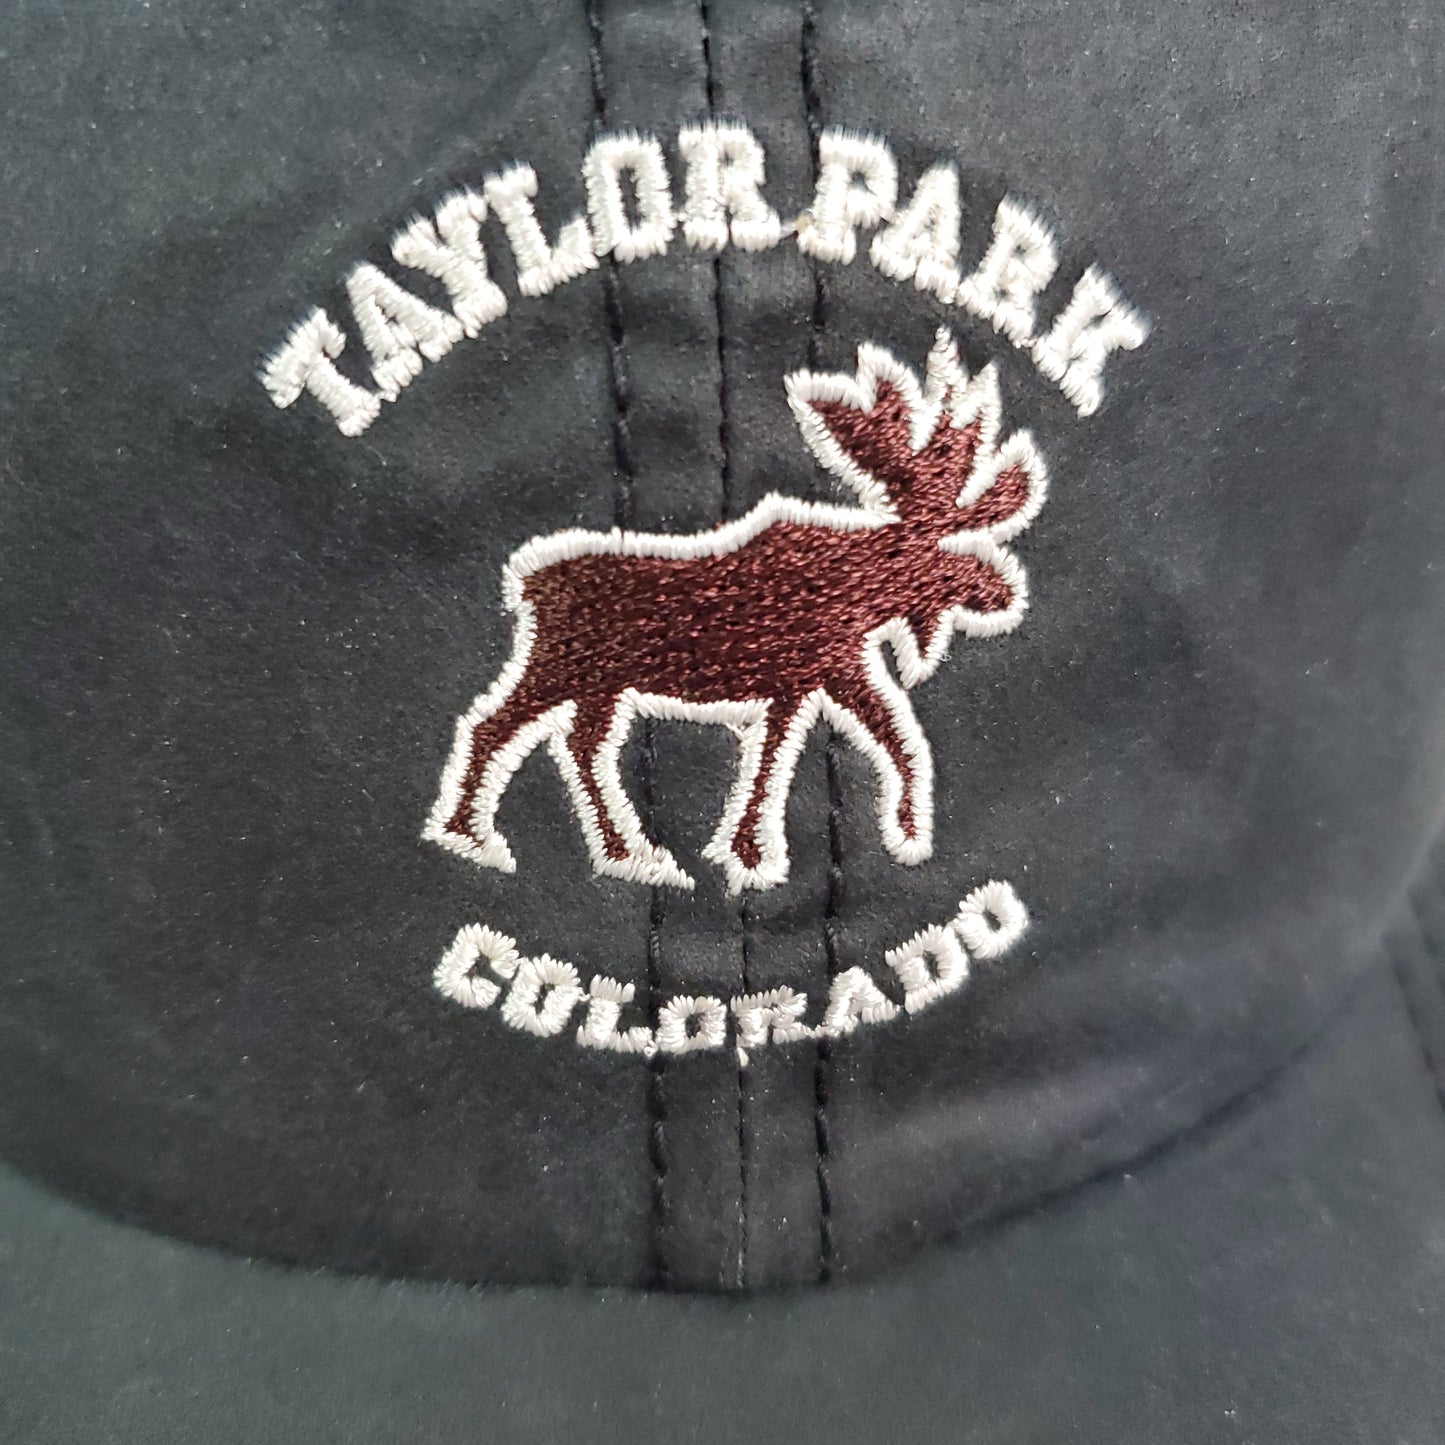 TAYLOR PARK COLORADO Black Gray Hat One Size Fits All By American Dry Goods Cap (New)